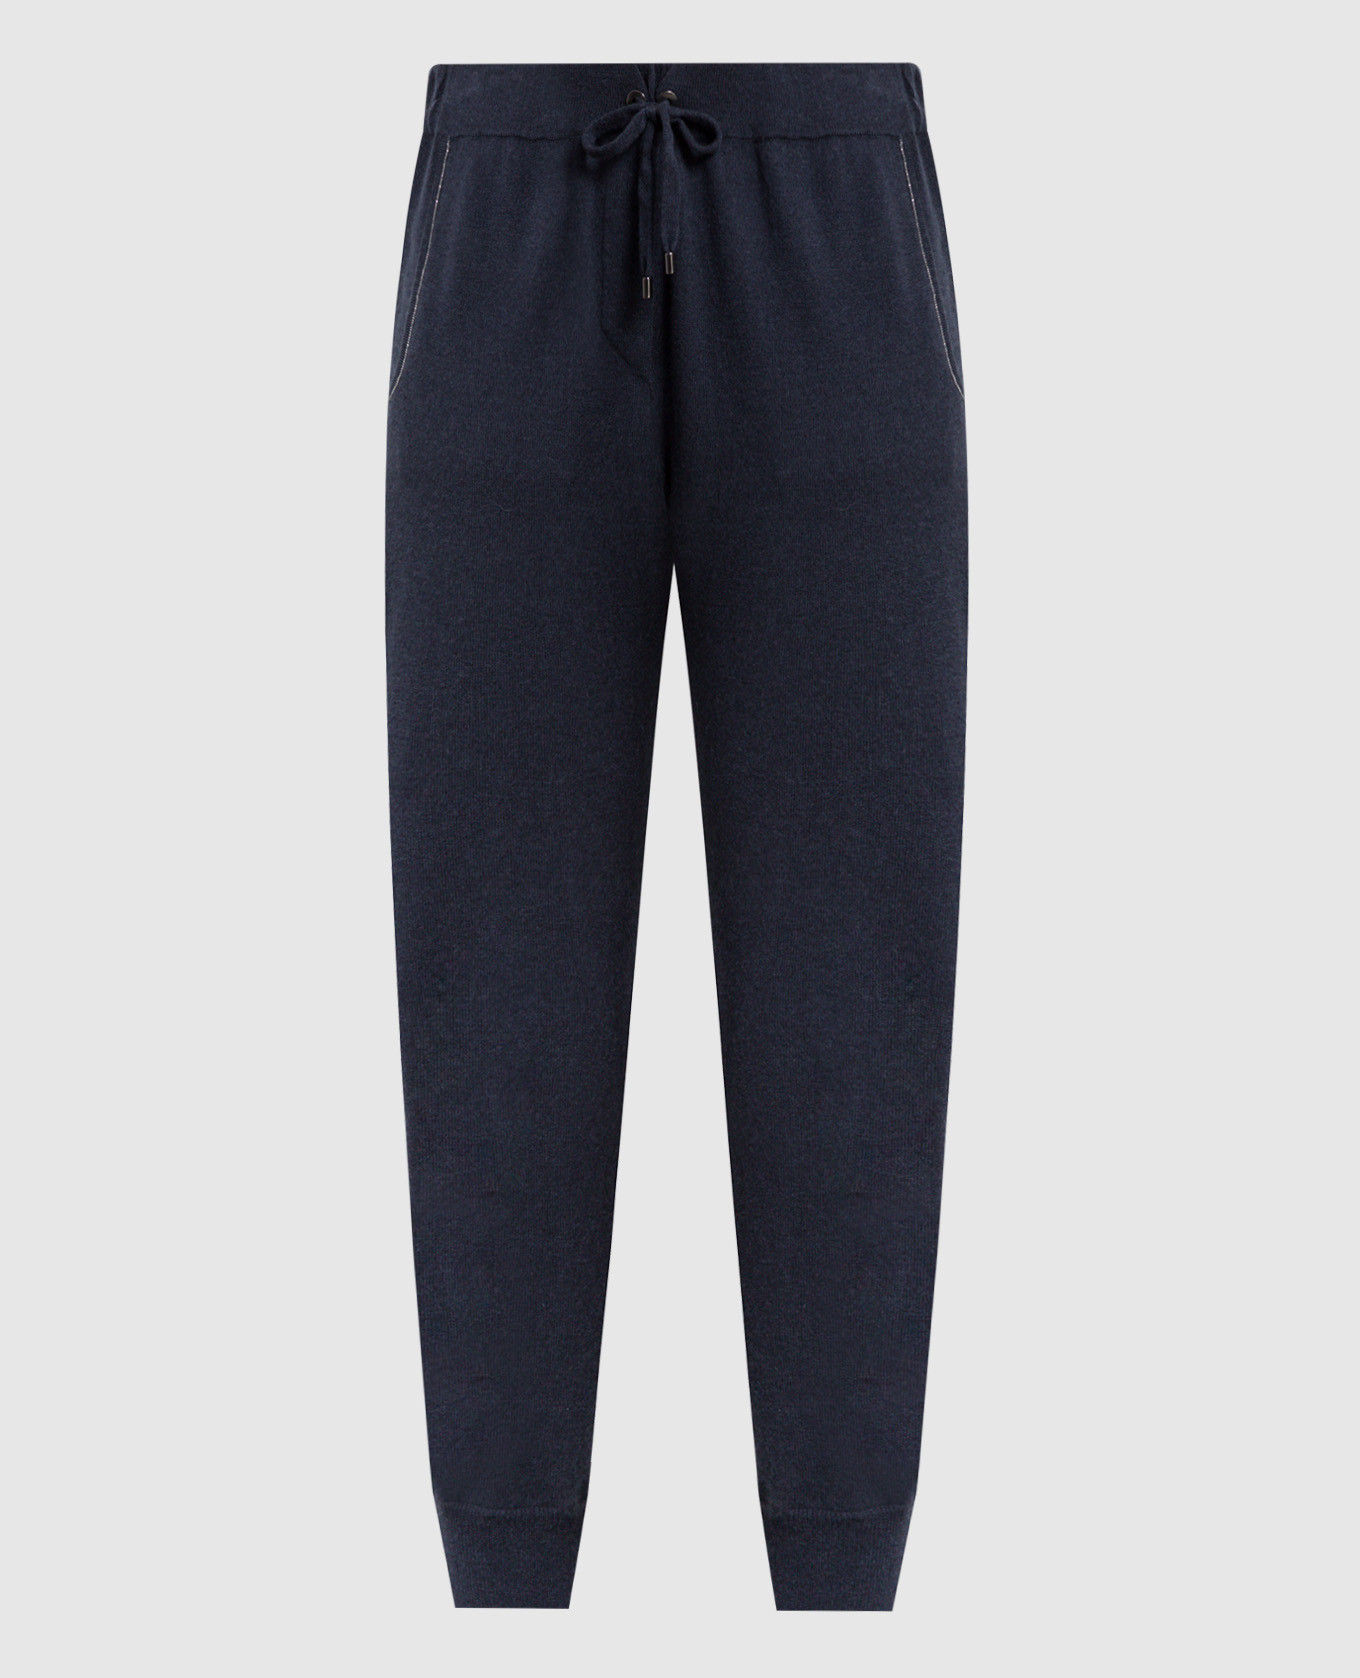 Navy blue cashmere joggers with monil chain